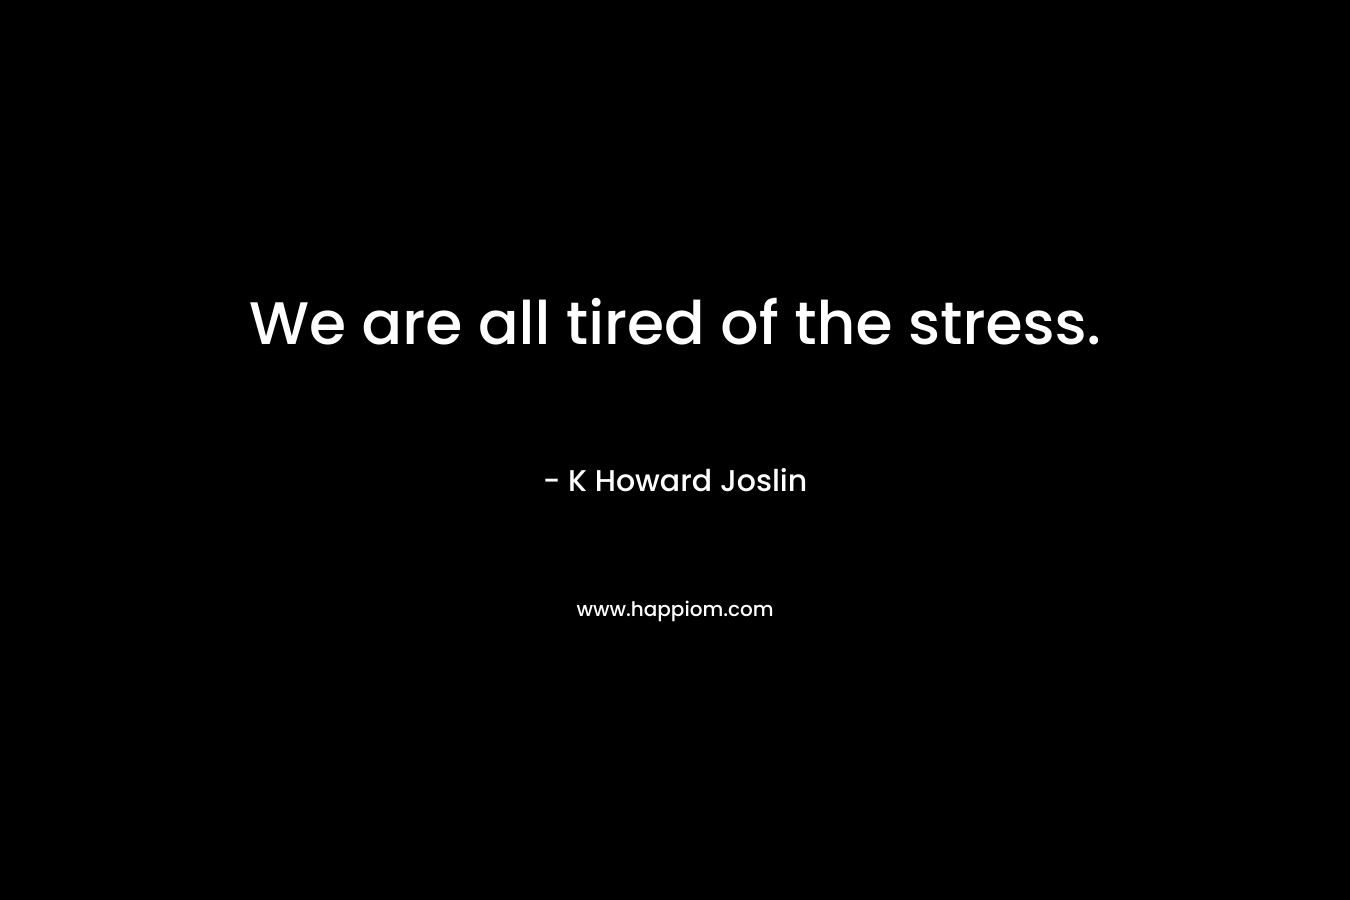 We are all tired of the stress. – K Howard Joslin